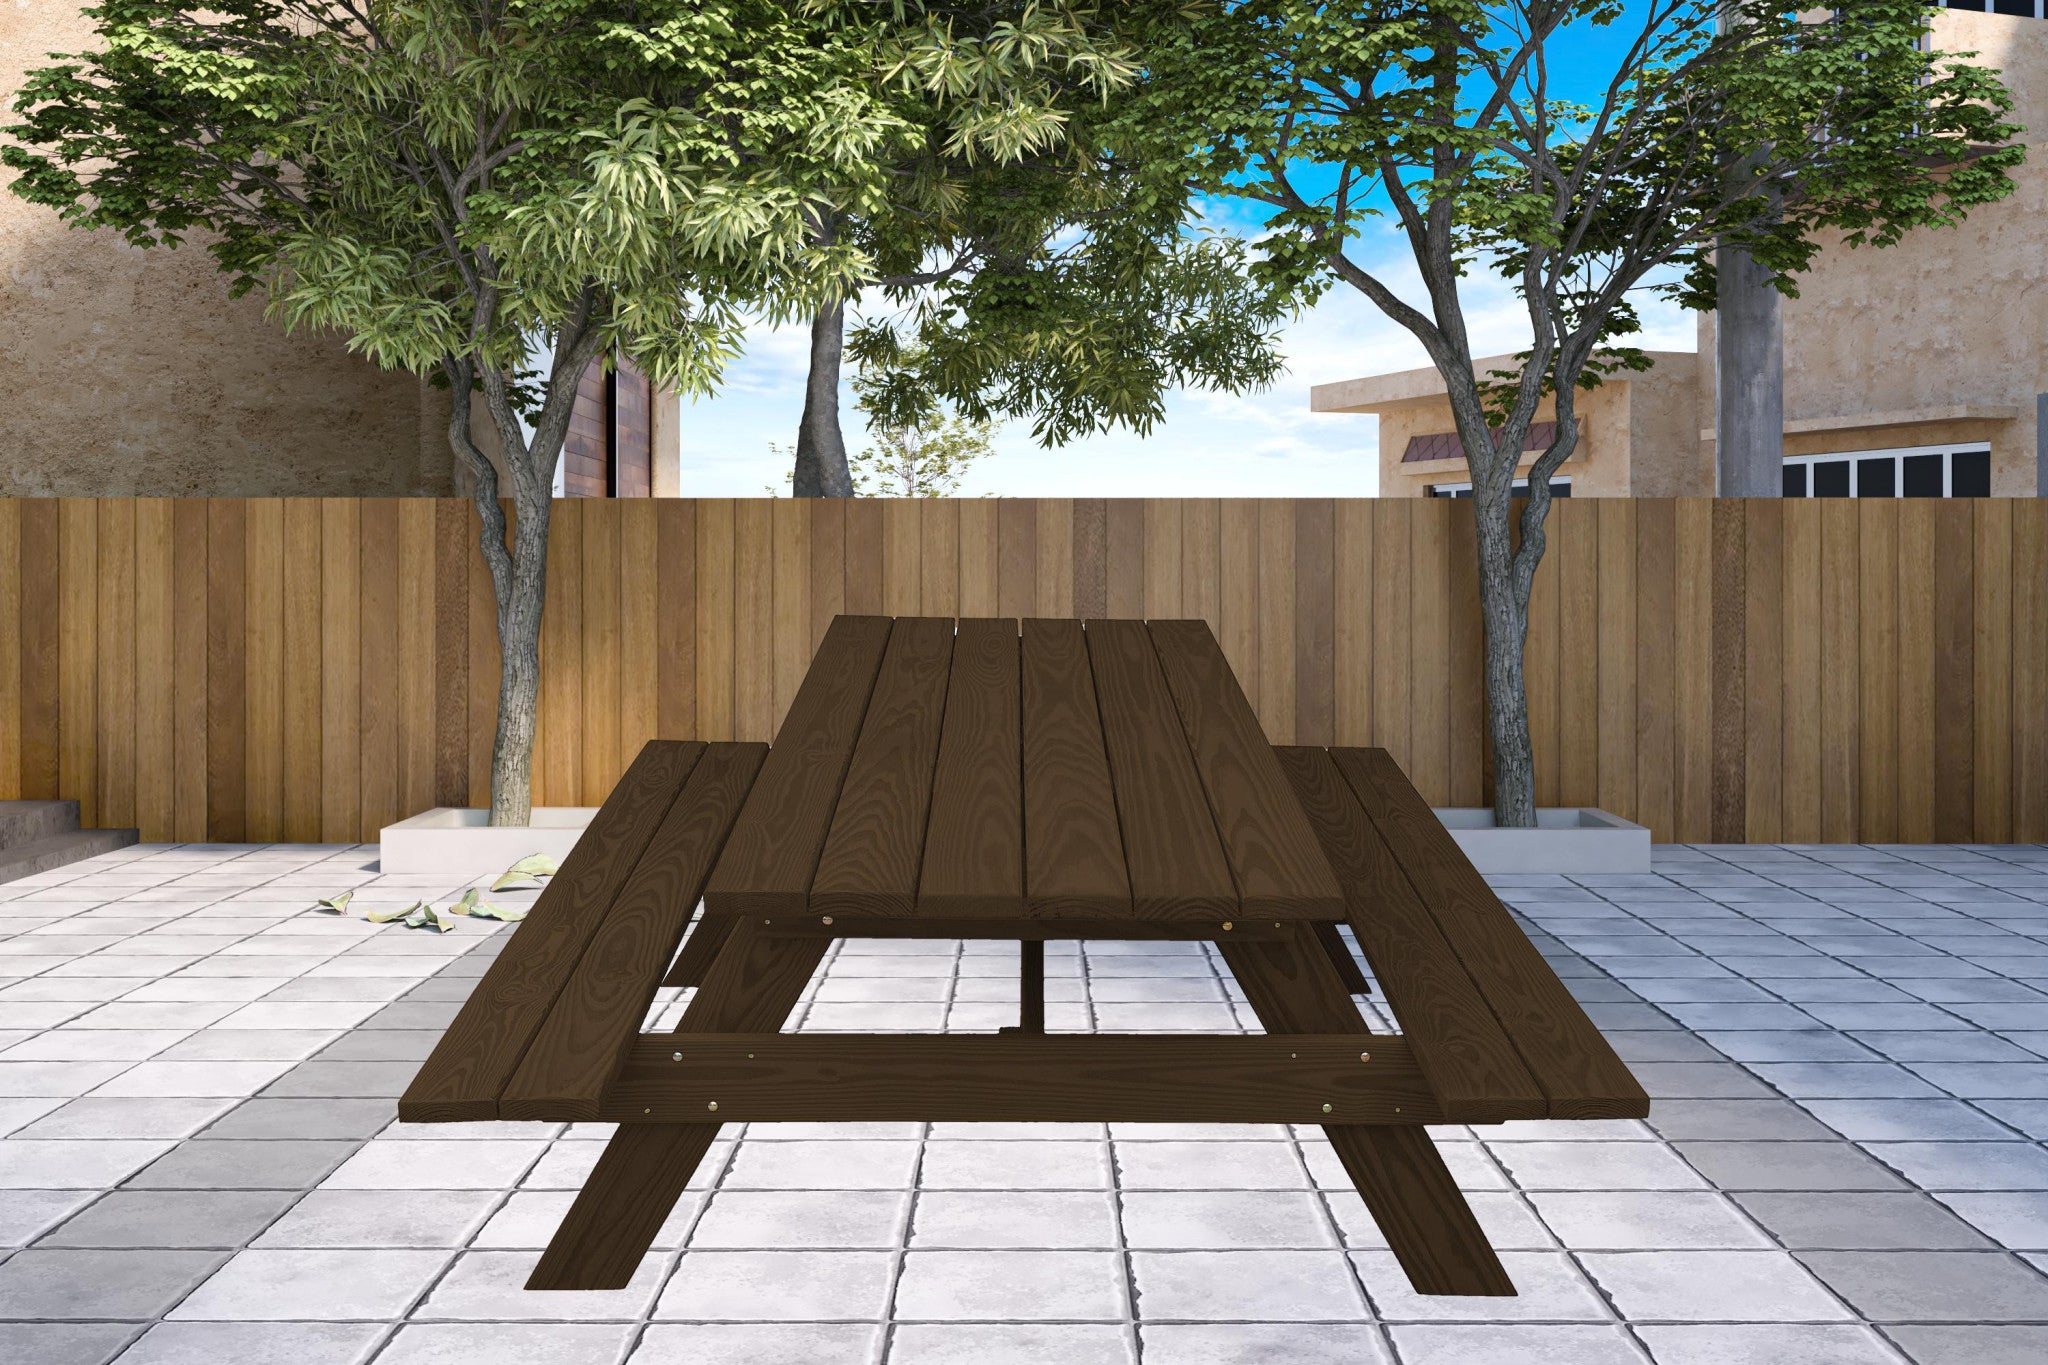 94" Dark Brown Solid Wood Outdoor Picnic Table